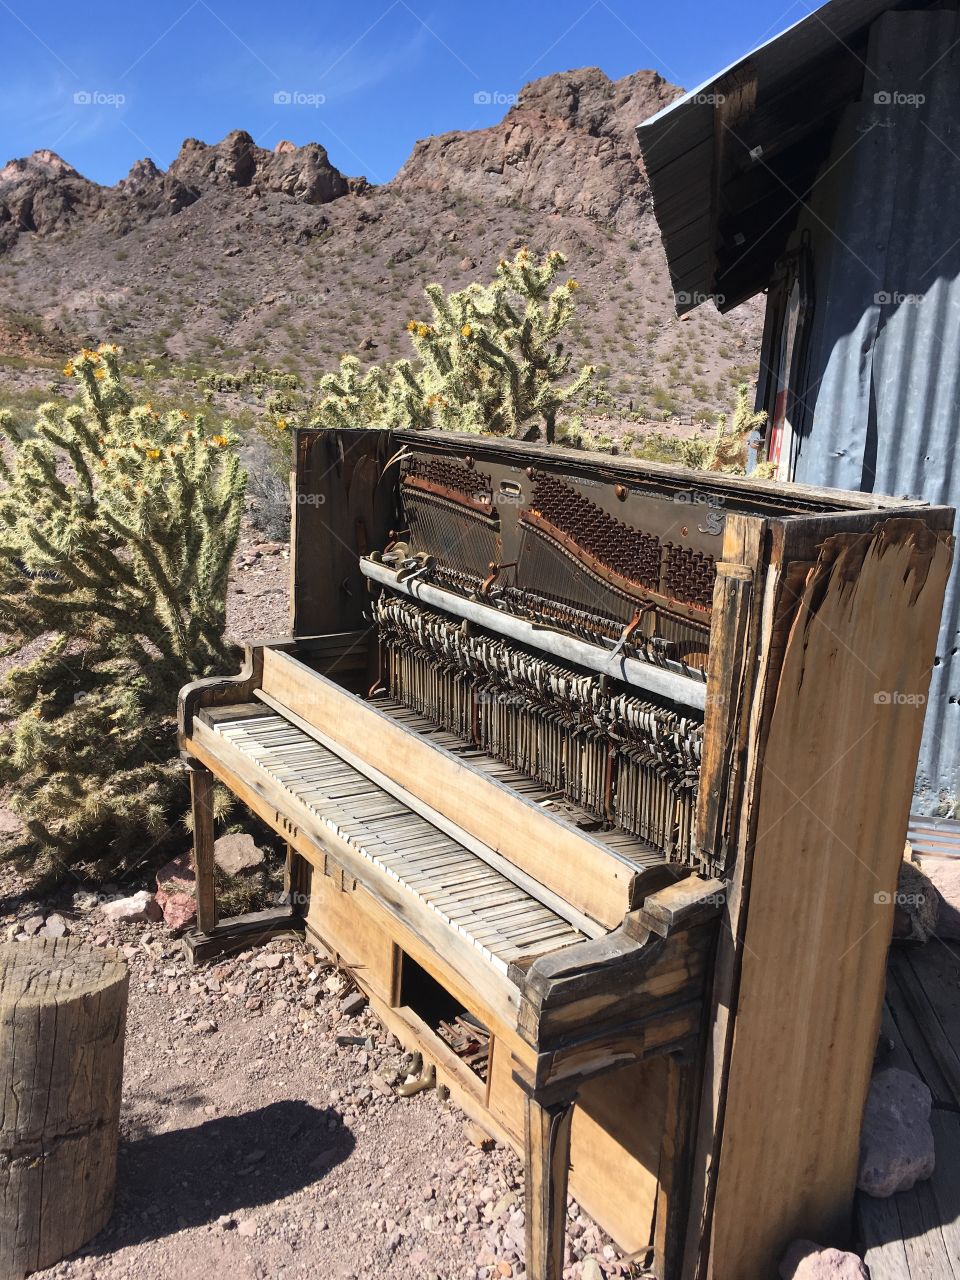 Old abandoned piano next to cactus plants in the desert. 